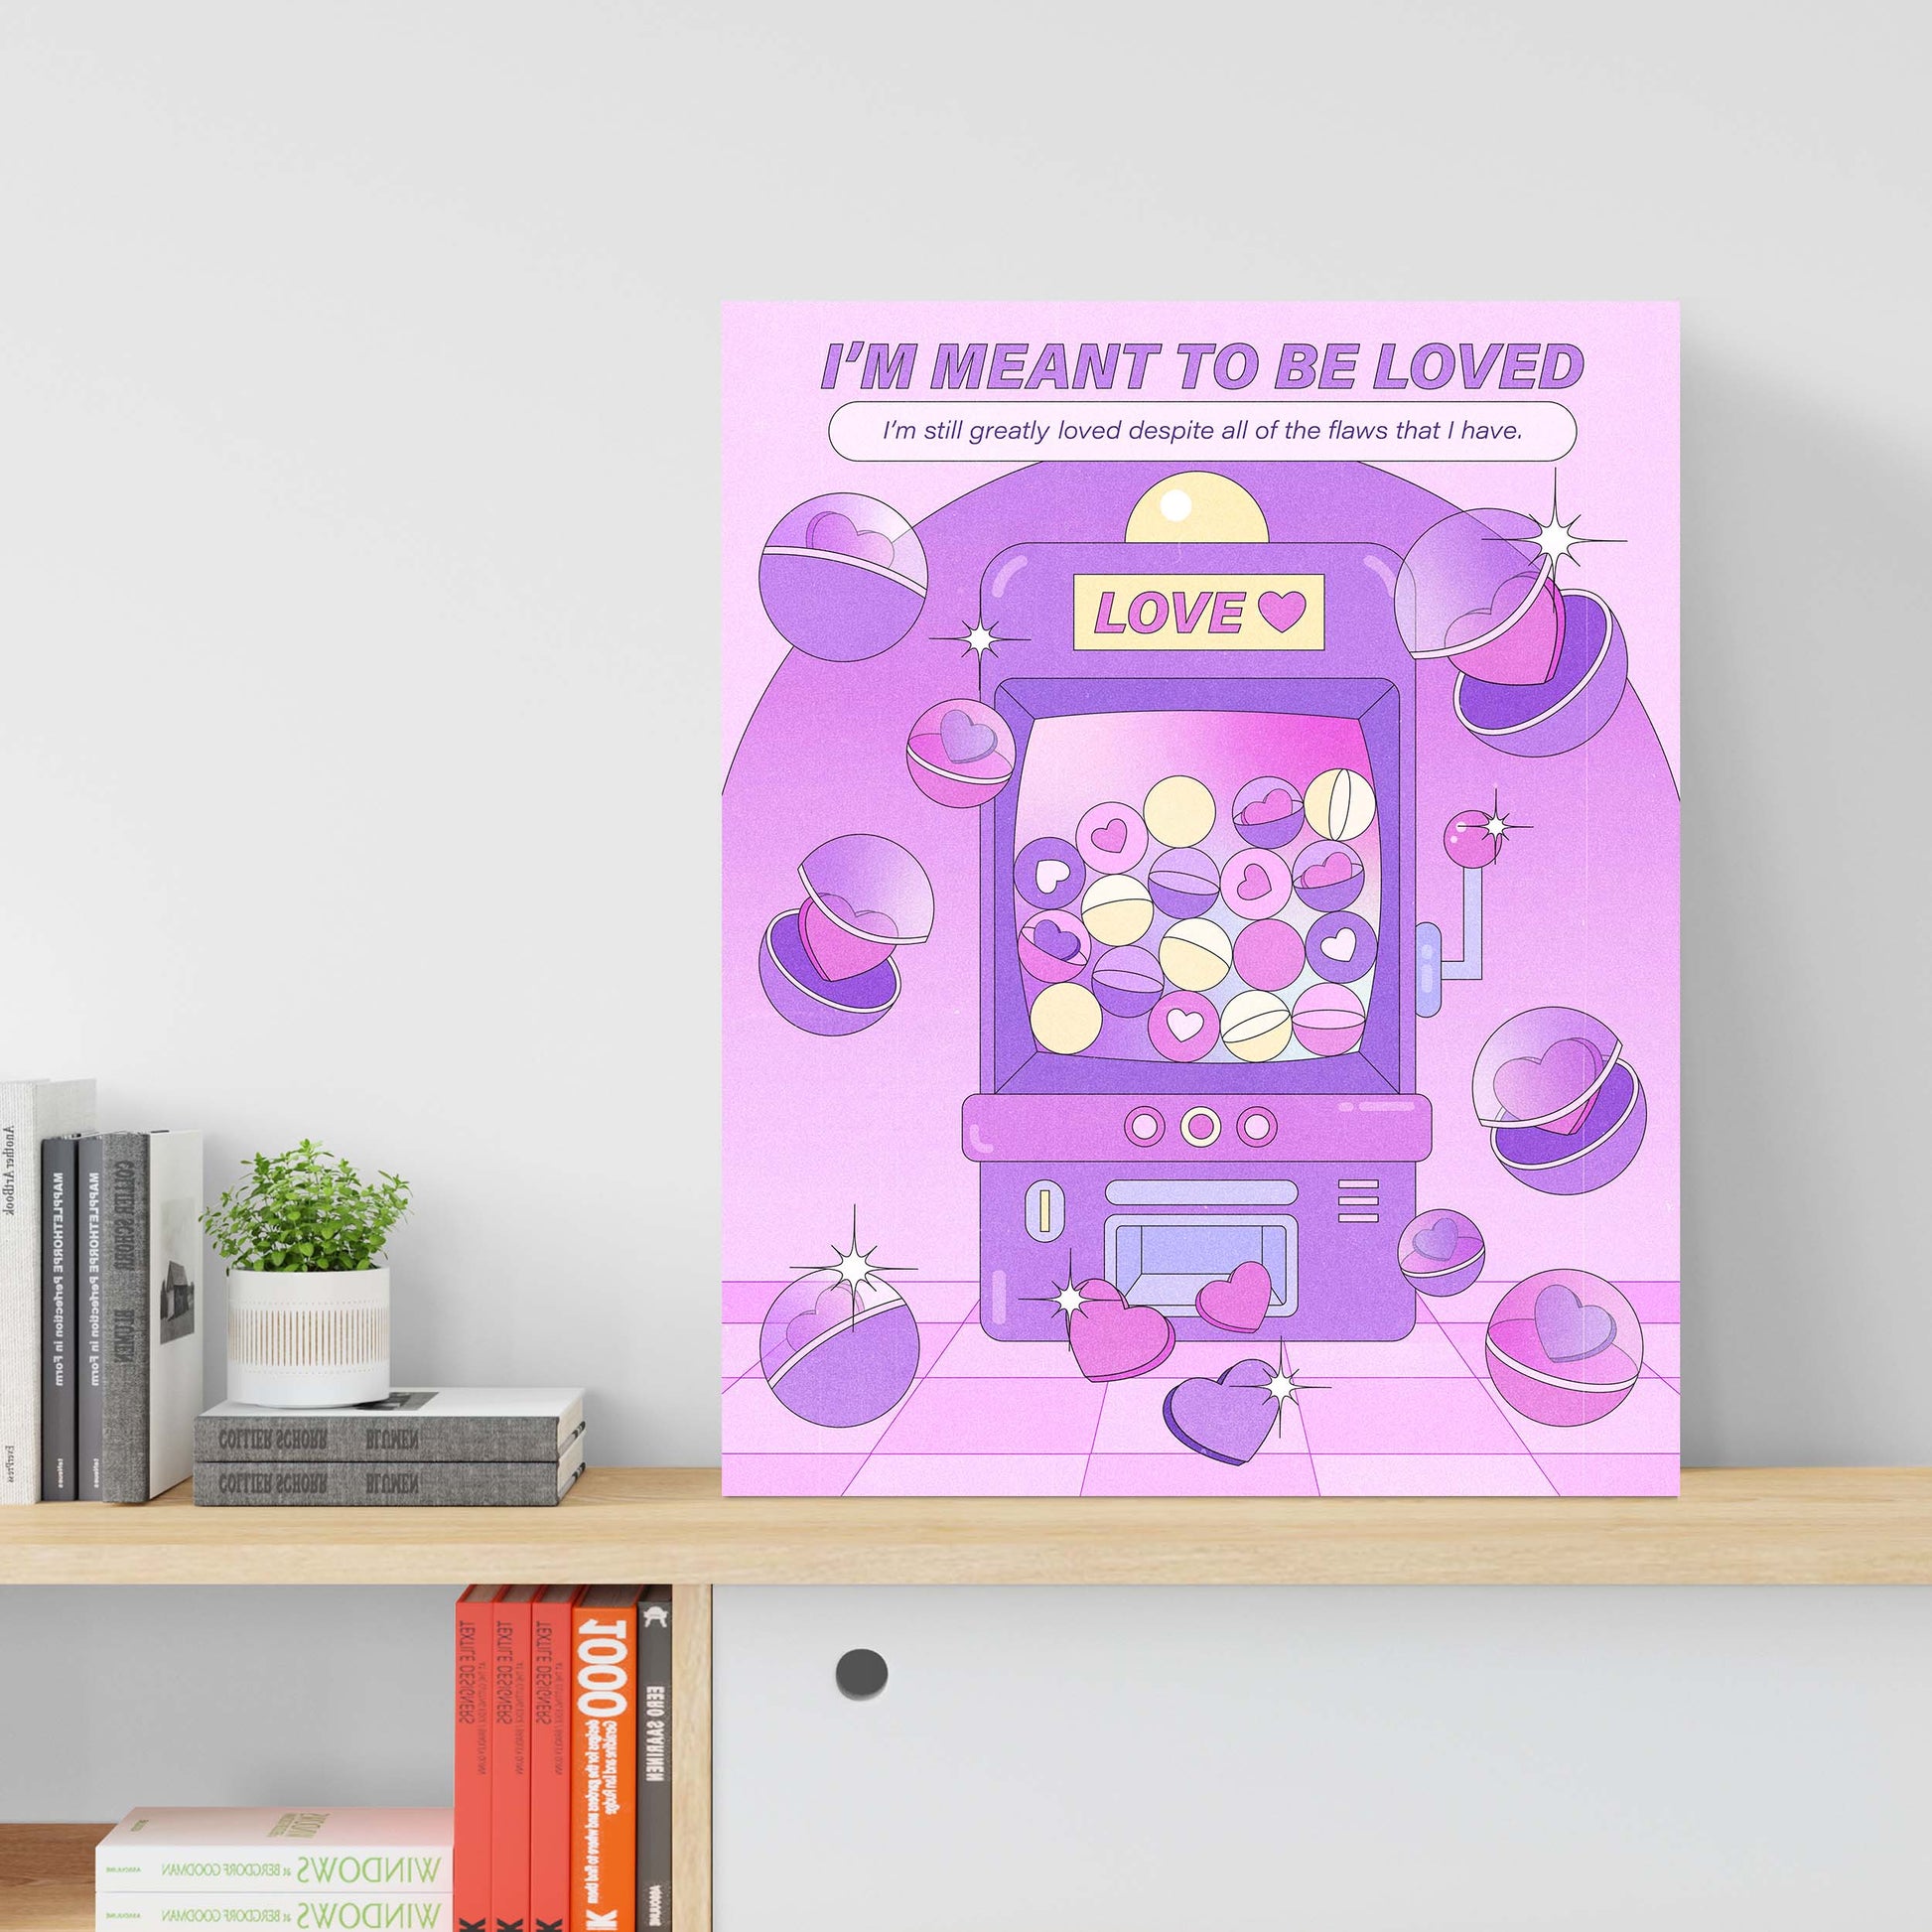 A purple claw machine self-care art print with the text "i'm meant to be loved" on a table